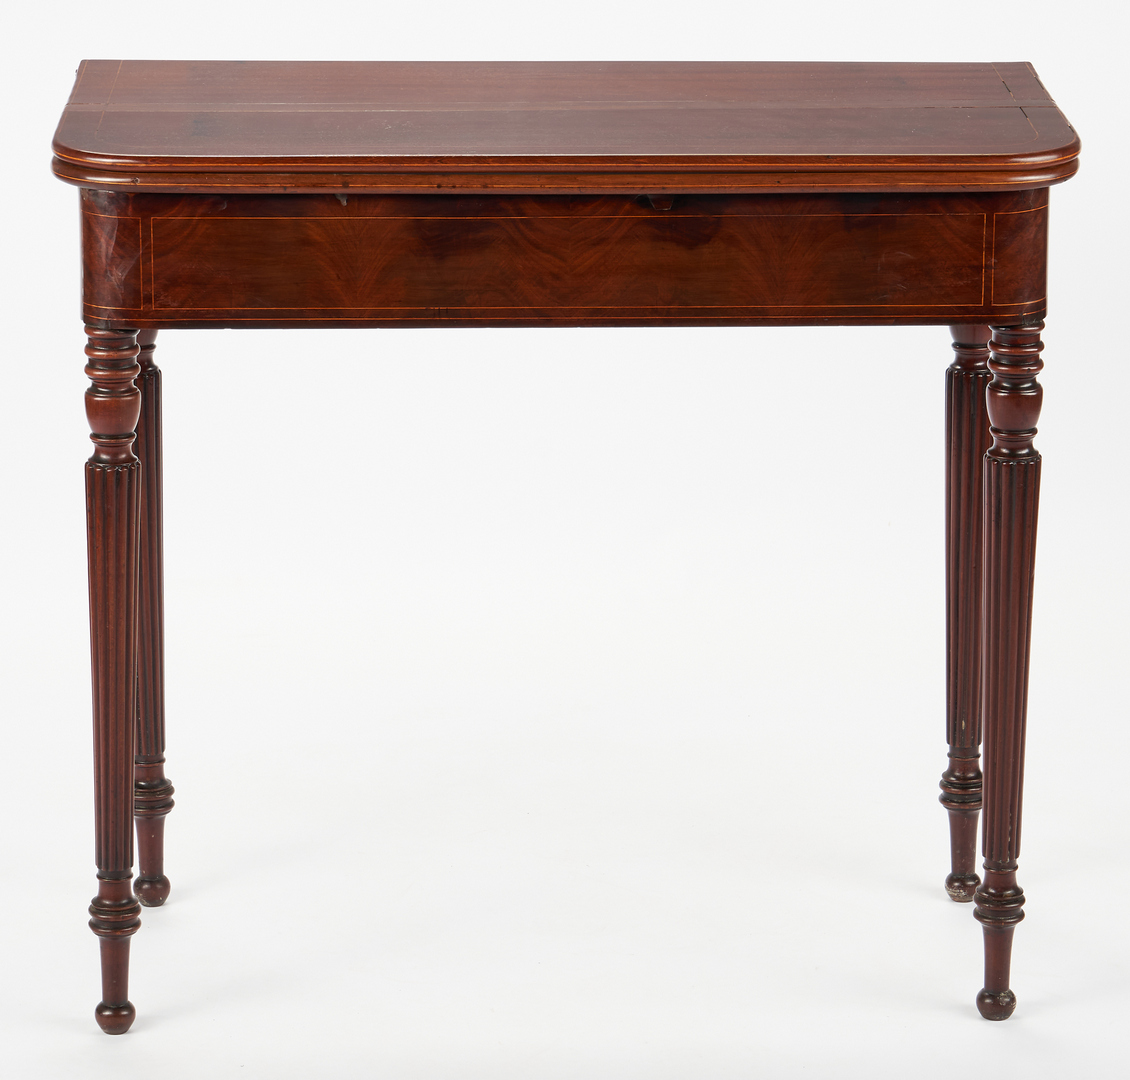 Lot 422: Massachusetts Federal Inlaid Game Table